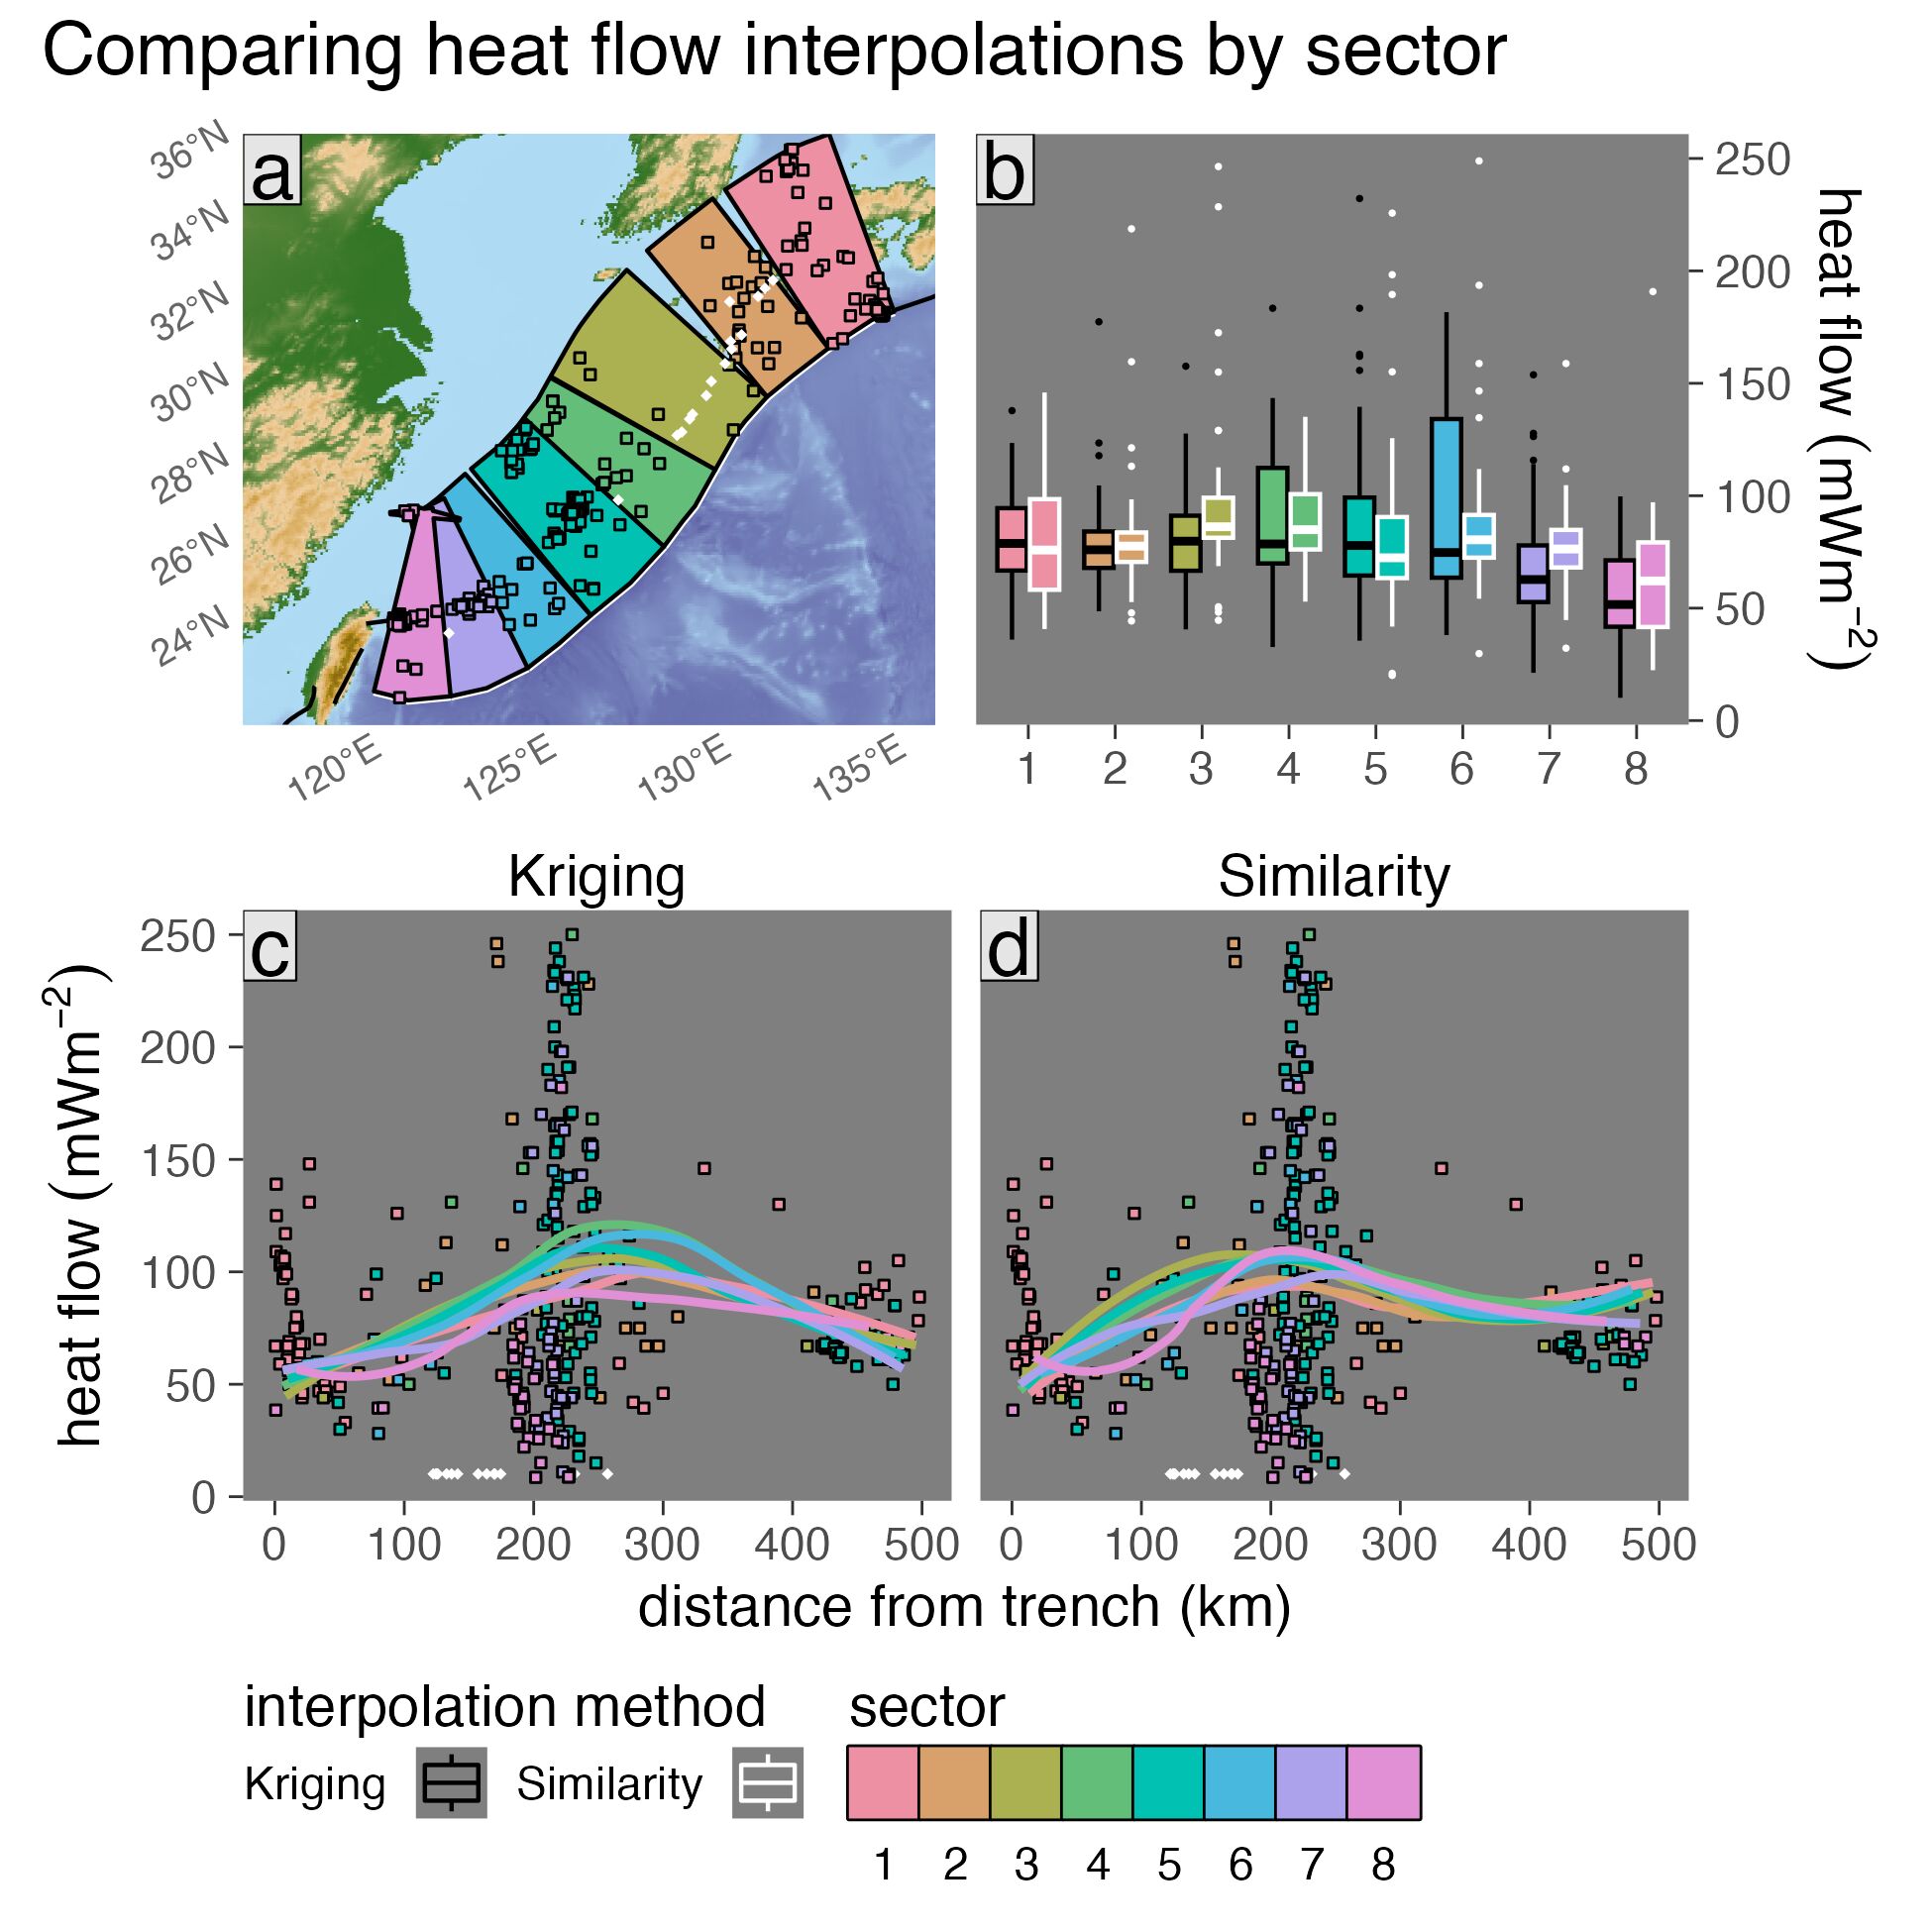 Surface heat flow profiles for Kyushu Ryukyu upper-plate sectors. (a) Similarity and Kriging predictions across sectors are largely indistinguishable with overlapping medians and IQRs (boxes). (b) Profiles are computed by finding orthogonal distances between the segment boundary (i.e. the trench, bold black line) and 342 surface heat flow predictions within eight 500 km-wide sectors (colored polygons). Profiles (colored curves with 95% confidence intervals) are remarkably consistent across sectors for (c) Kriging and (d) Similarity predictions. Colored squares are ThermoGlobe data from Lucazeau (2019). Segment boundary and volcanoes (gold diamonds) defined by Syracuse & Abers (2006). Plate boundaries (bold black lines) defined by Lawver et al. (2018). Profile curves in (c) are LOESS regressions through three-point running averages (small colored data points).